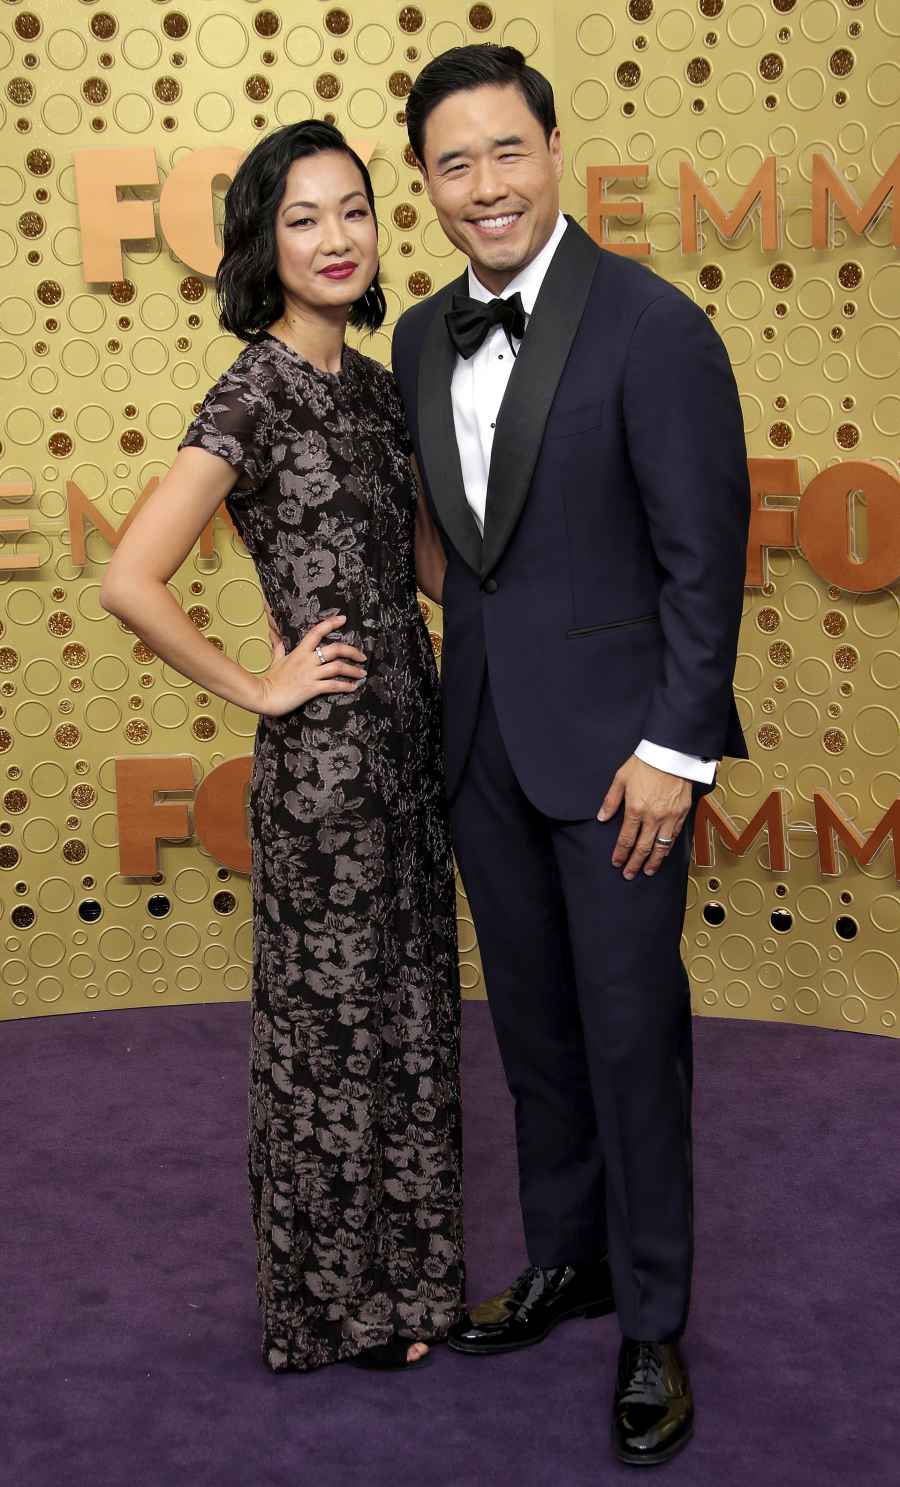 Emmys 2019 Stylish Couples - Randall Park and Jae W. Suh